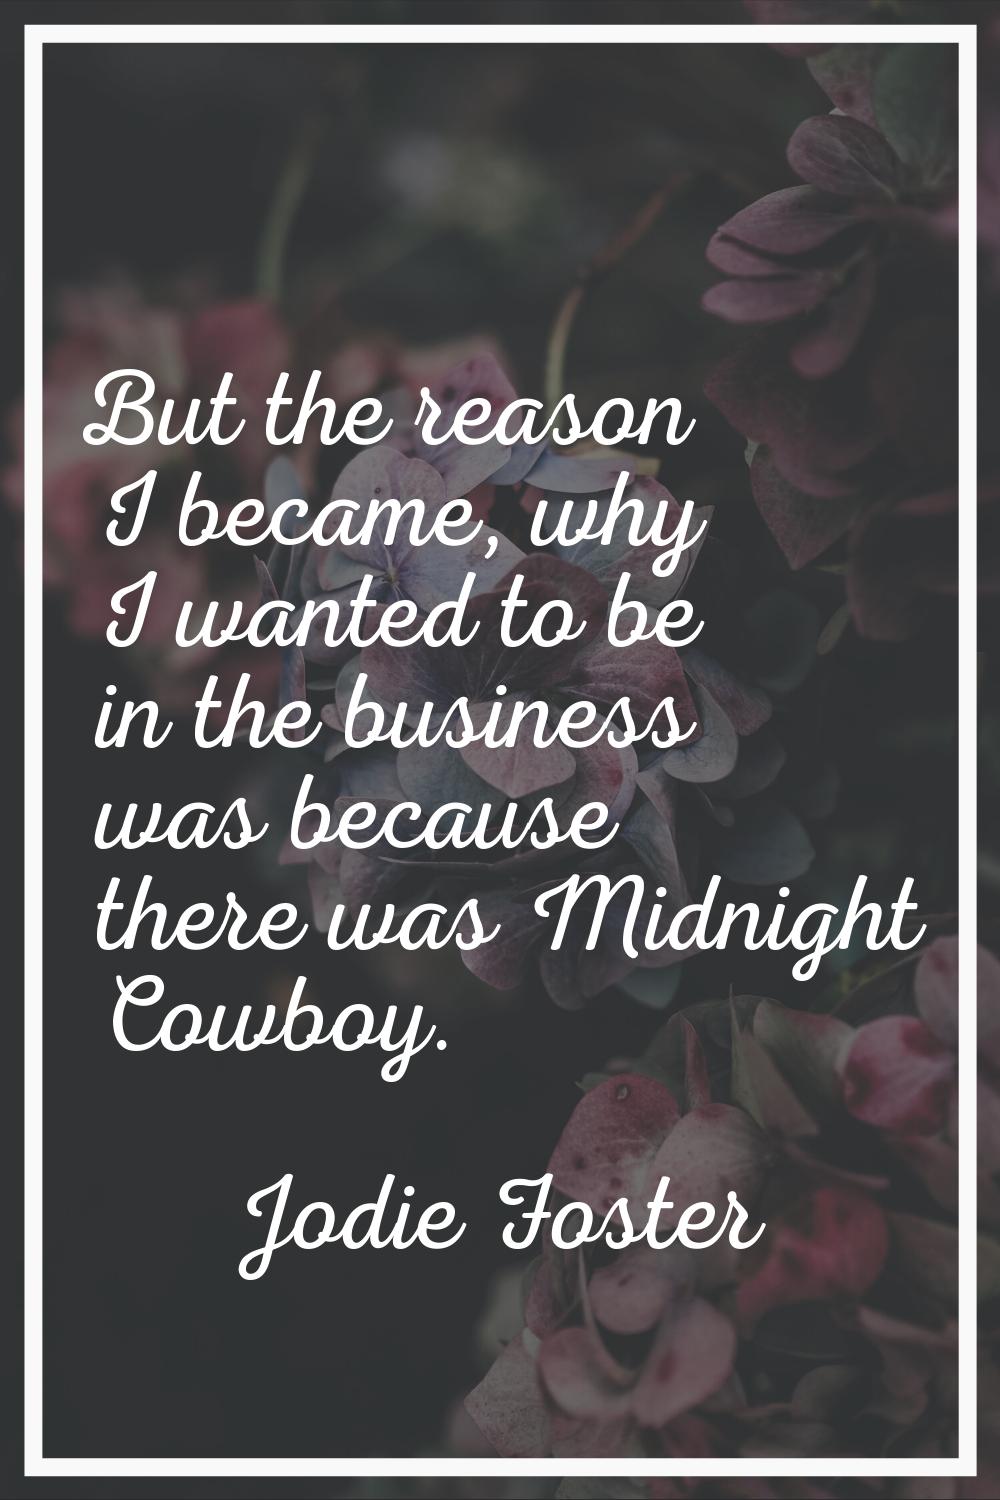 But the reason I became, why I wanted to be in the business was because there was Midnight Cowboy.